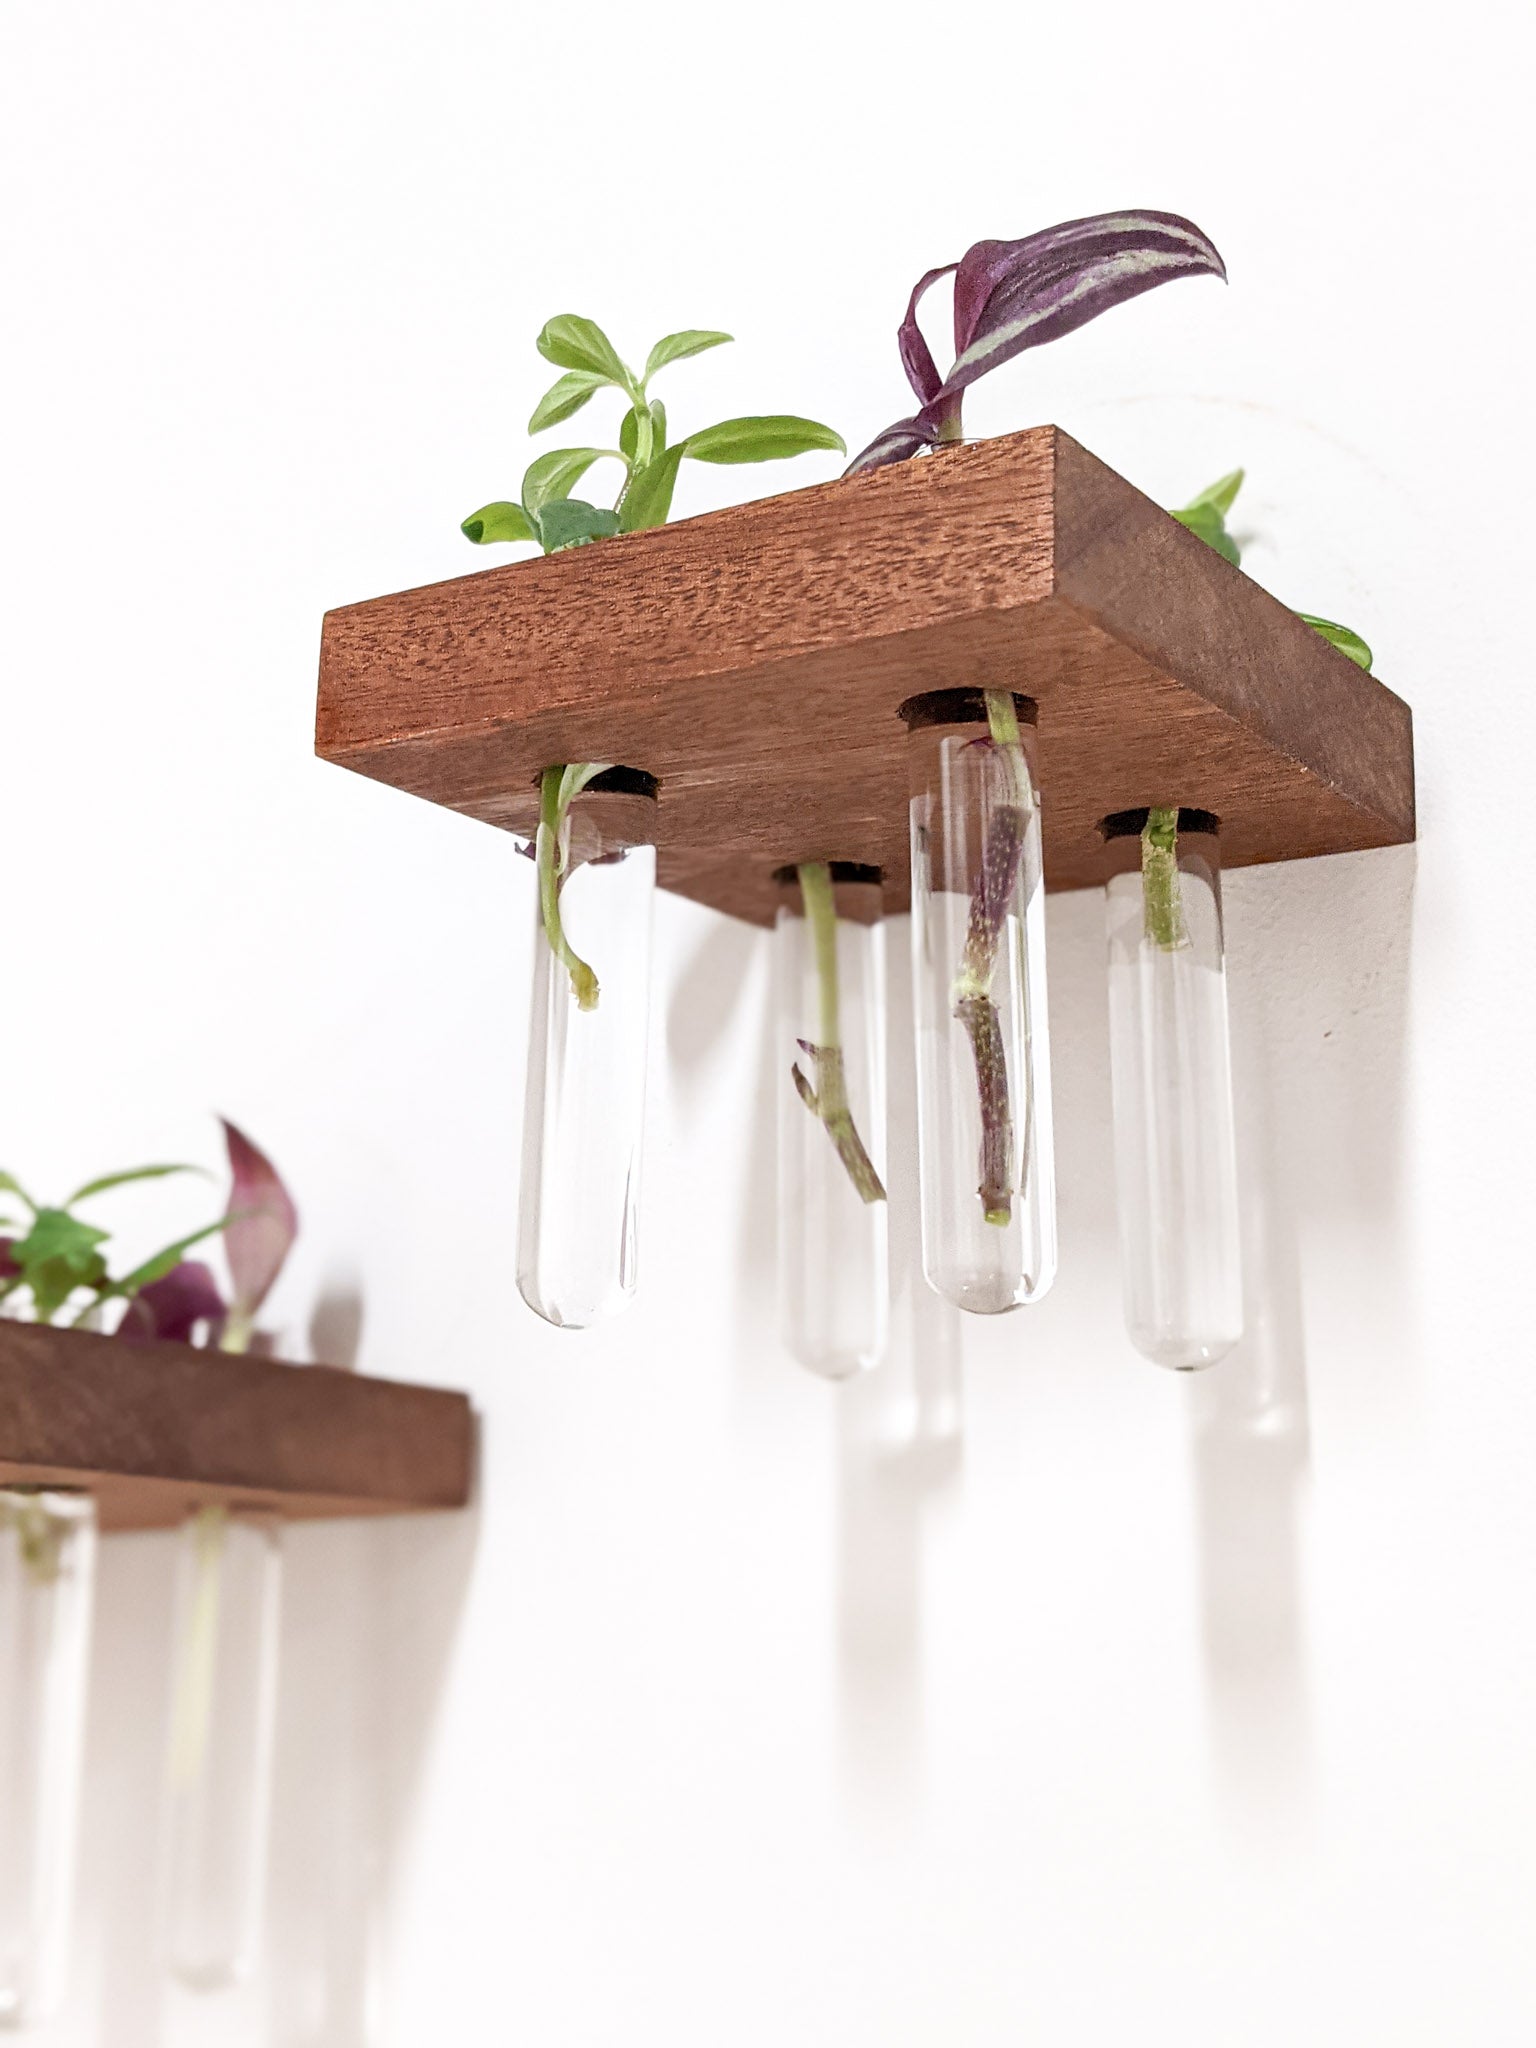 A square mahogany propagation shelf is wall mounted. Four test tubes dangle beneath the shelf and contain cutting of a wandering jew plant. To the left, the side of a mahogany square propagation shelf can be seen.